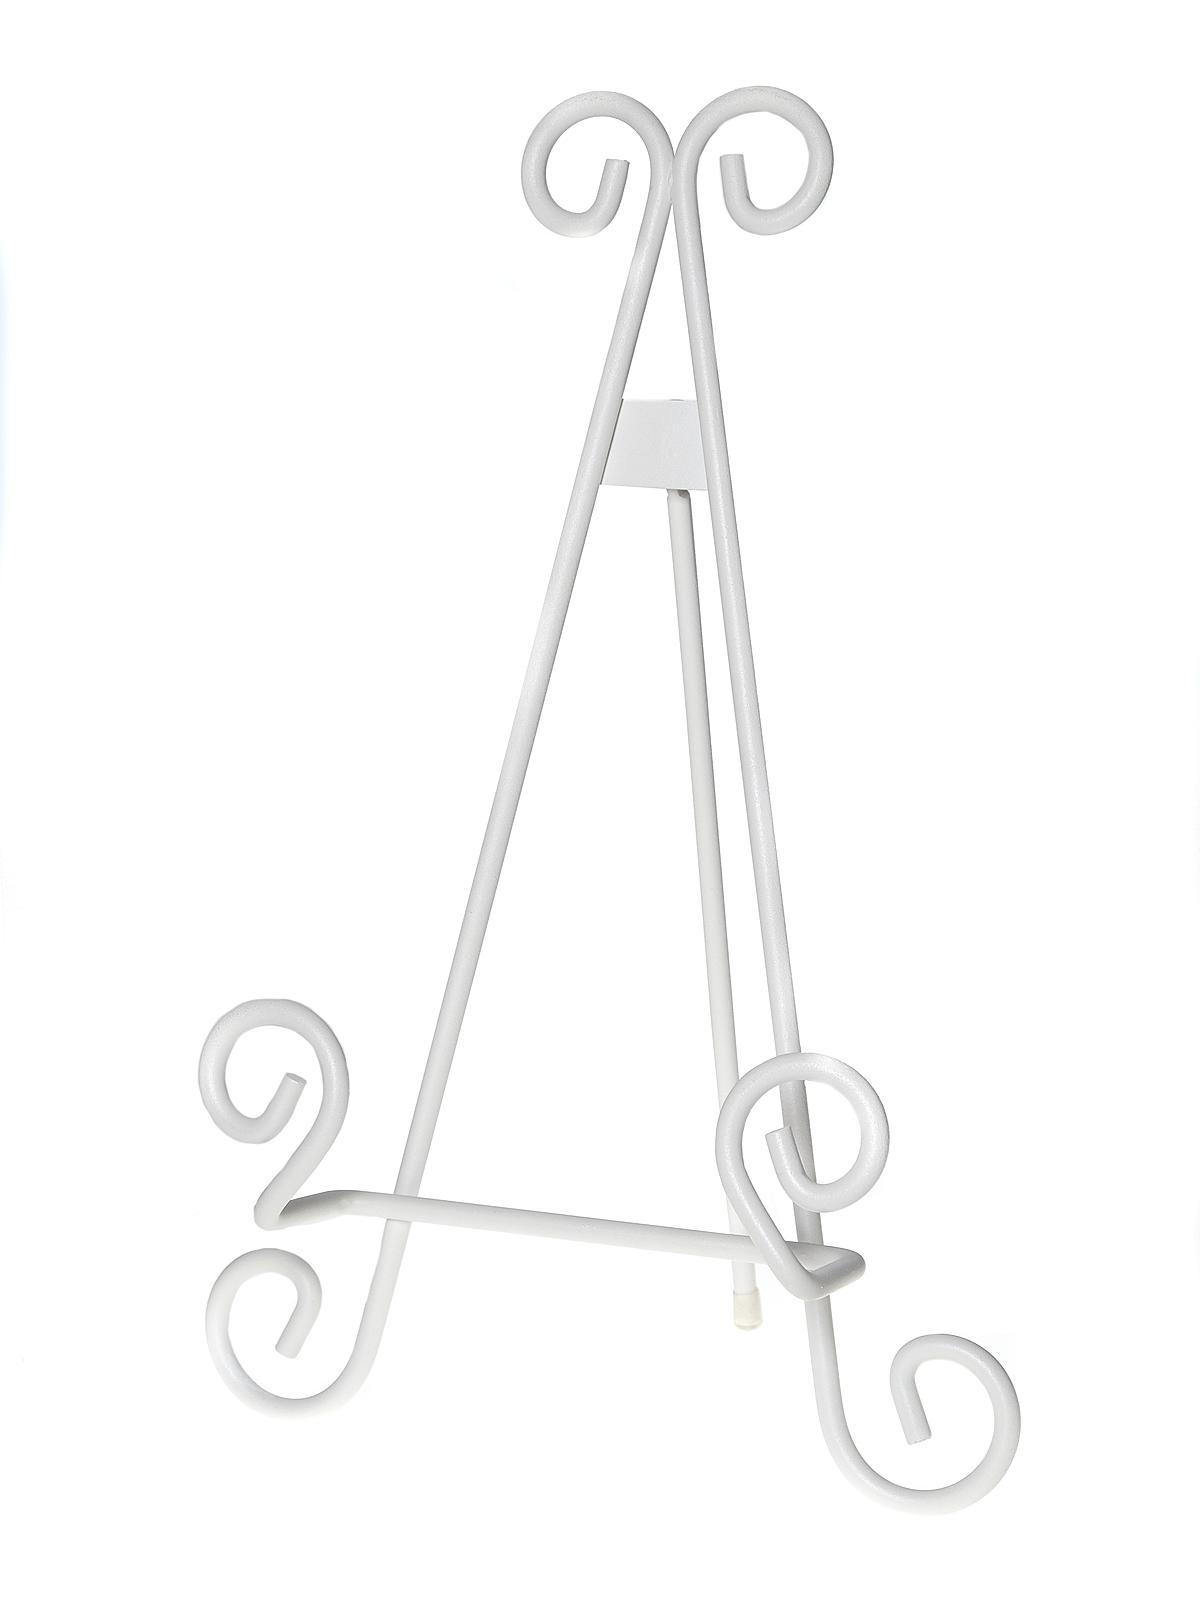 Stratford Metal Scroll Easels 13 In. Each Antique White